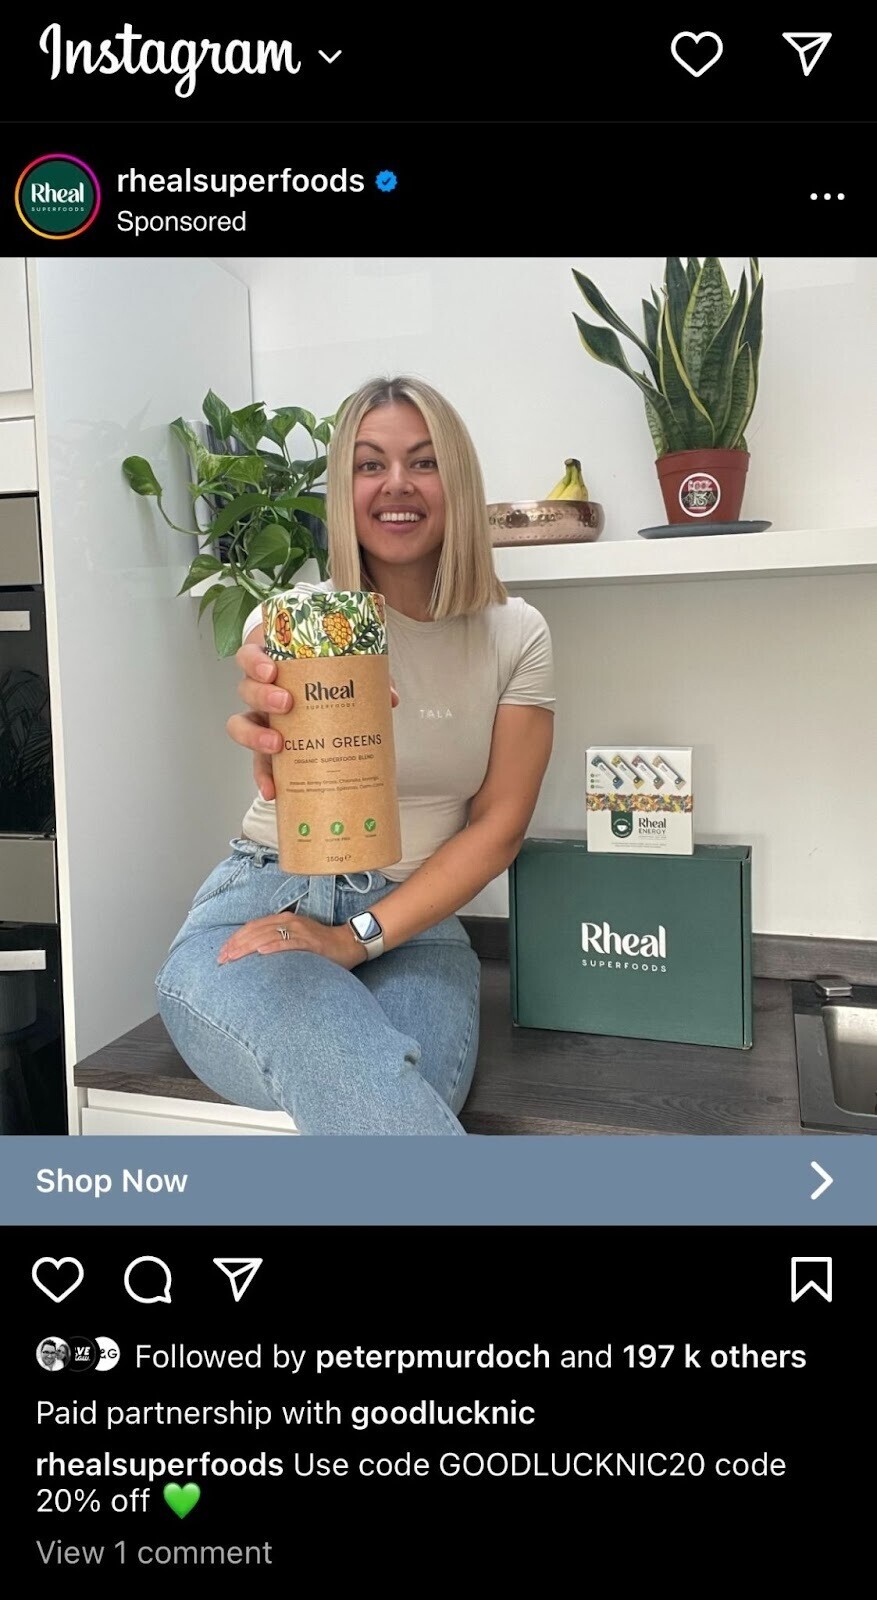 Rheal Superfoods’s sponsored Instagram post with Nicole Robinson